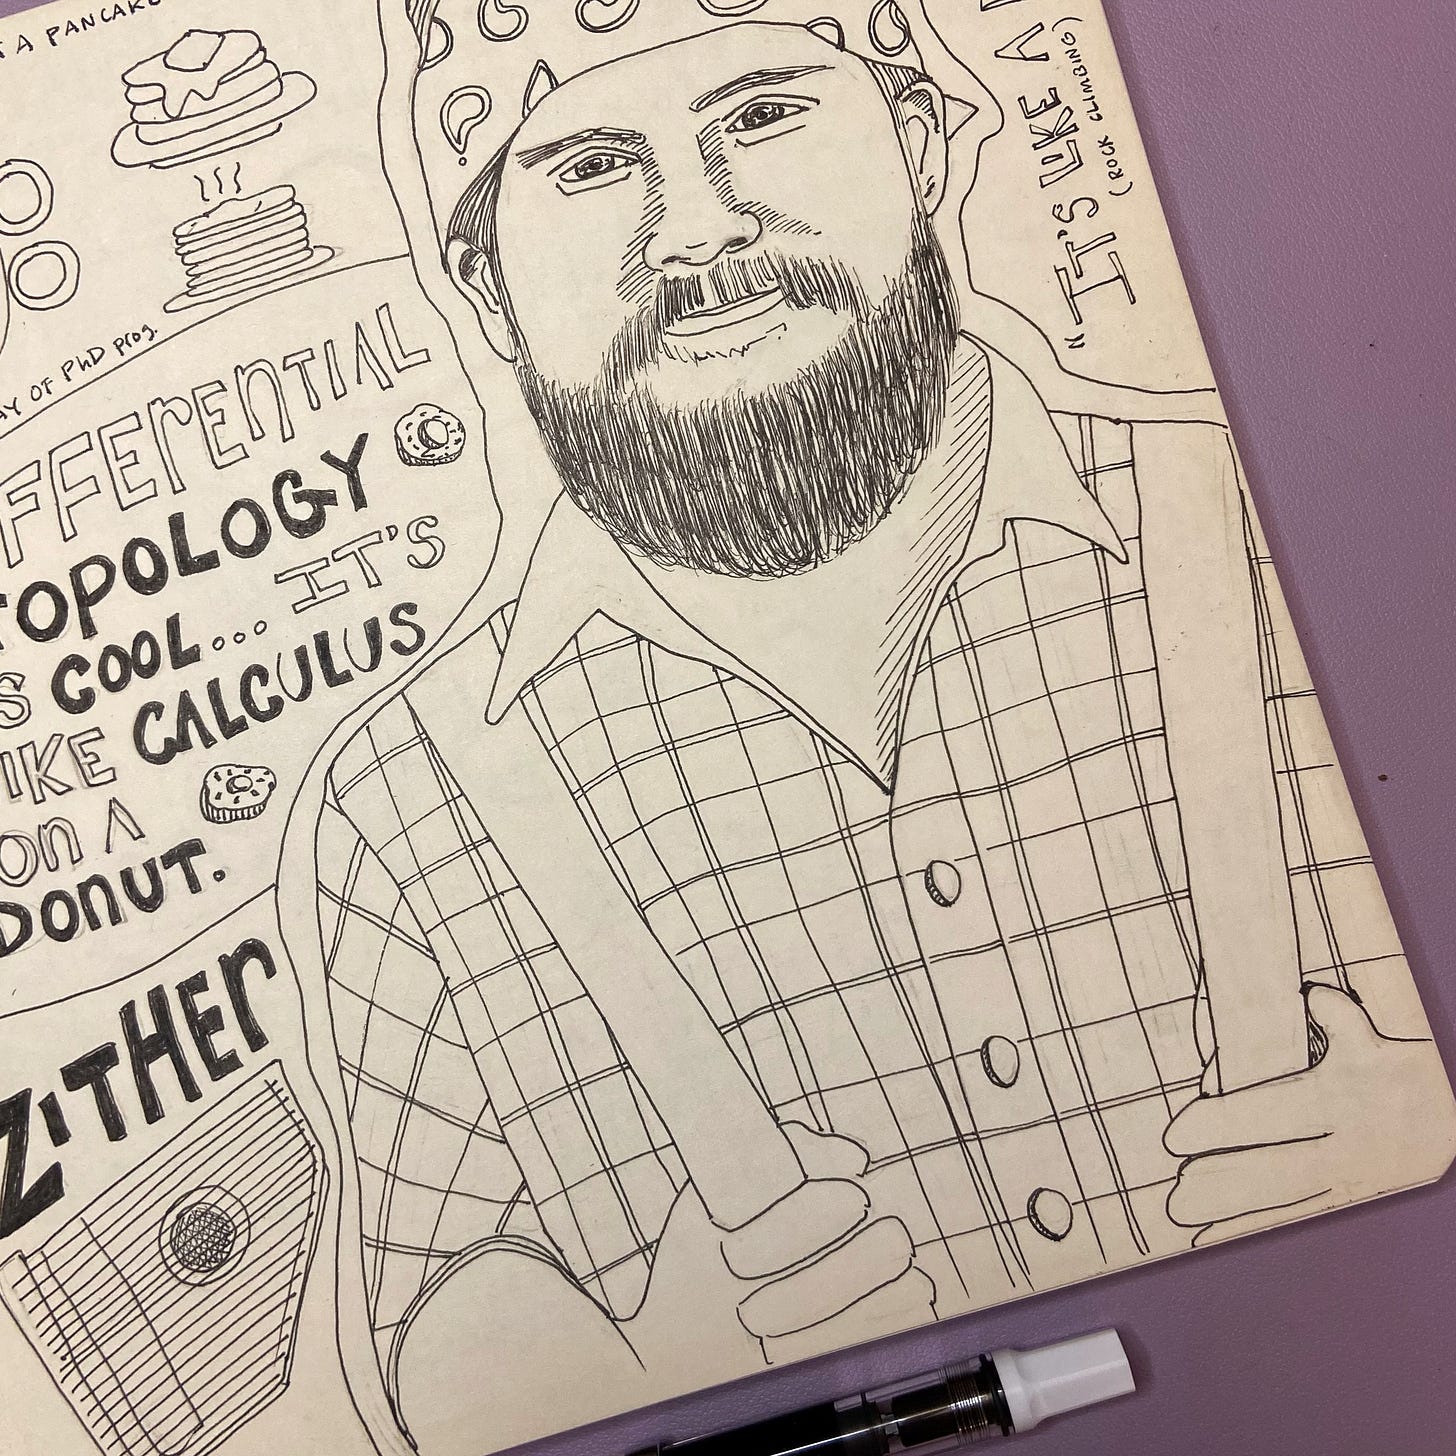 Lumberjack drawing from illustrated journal spread